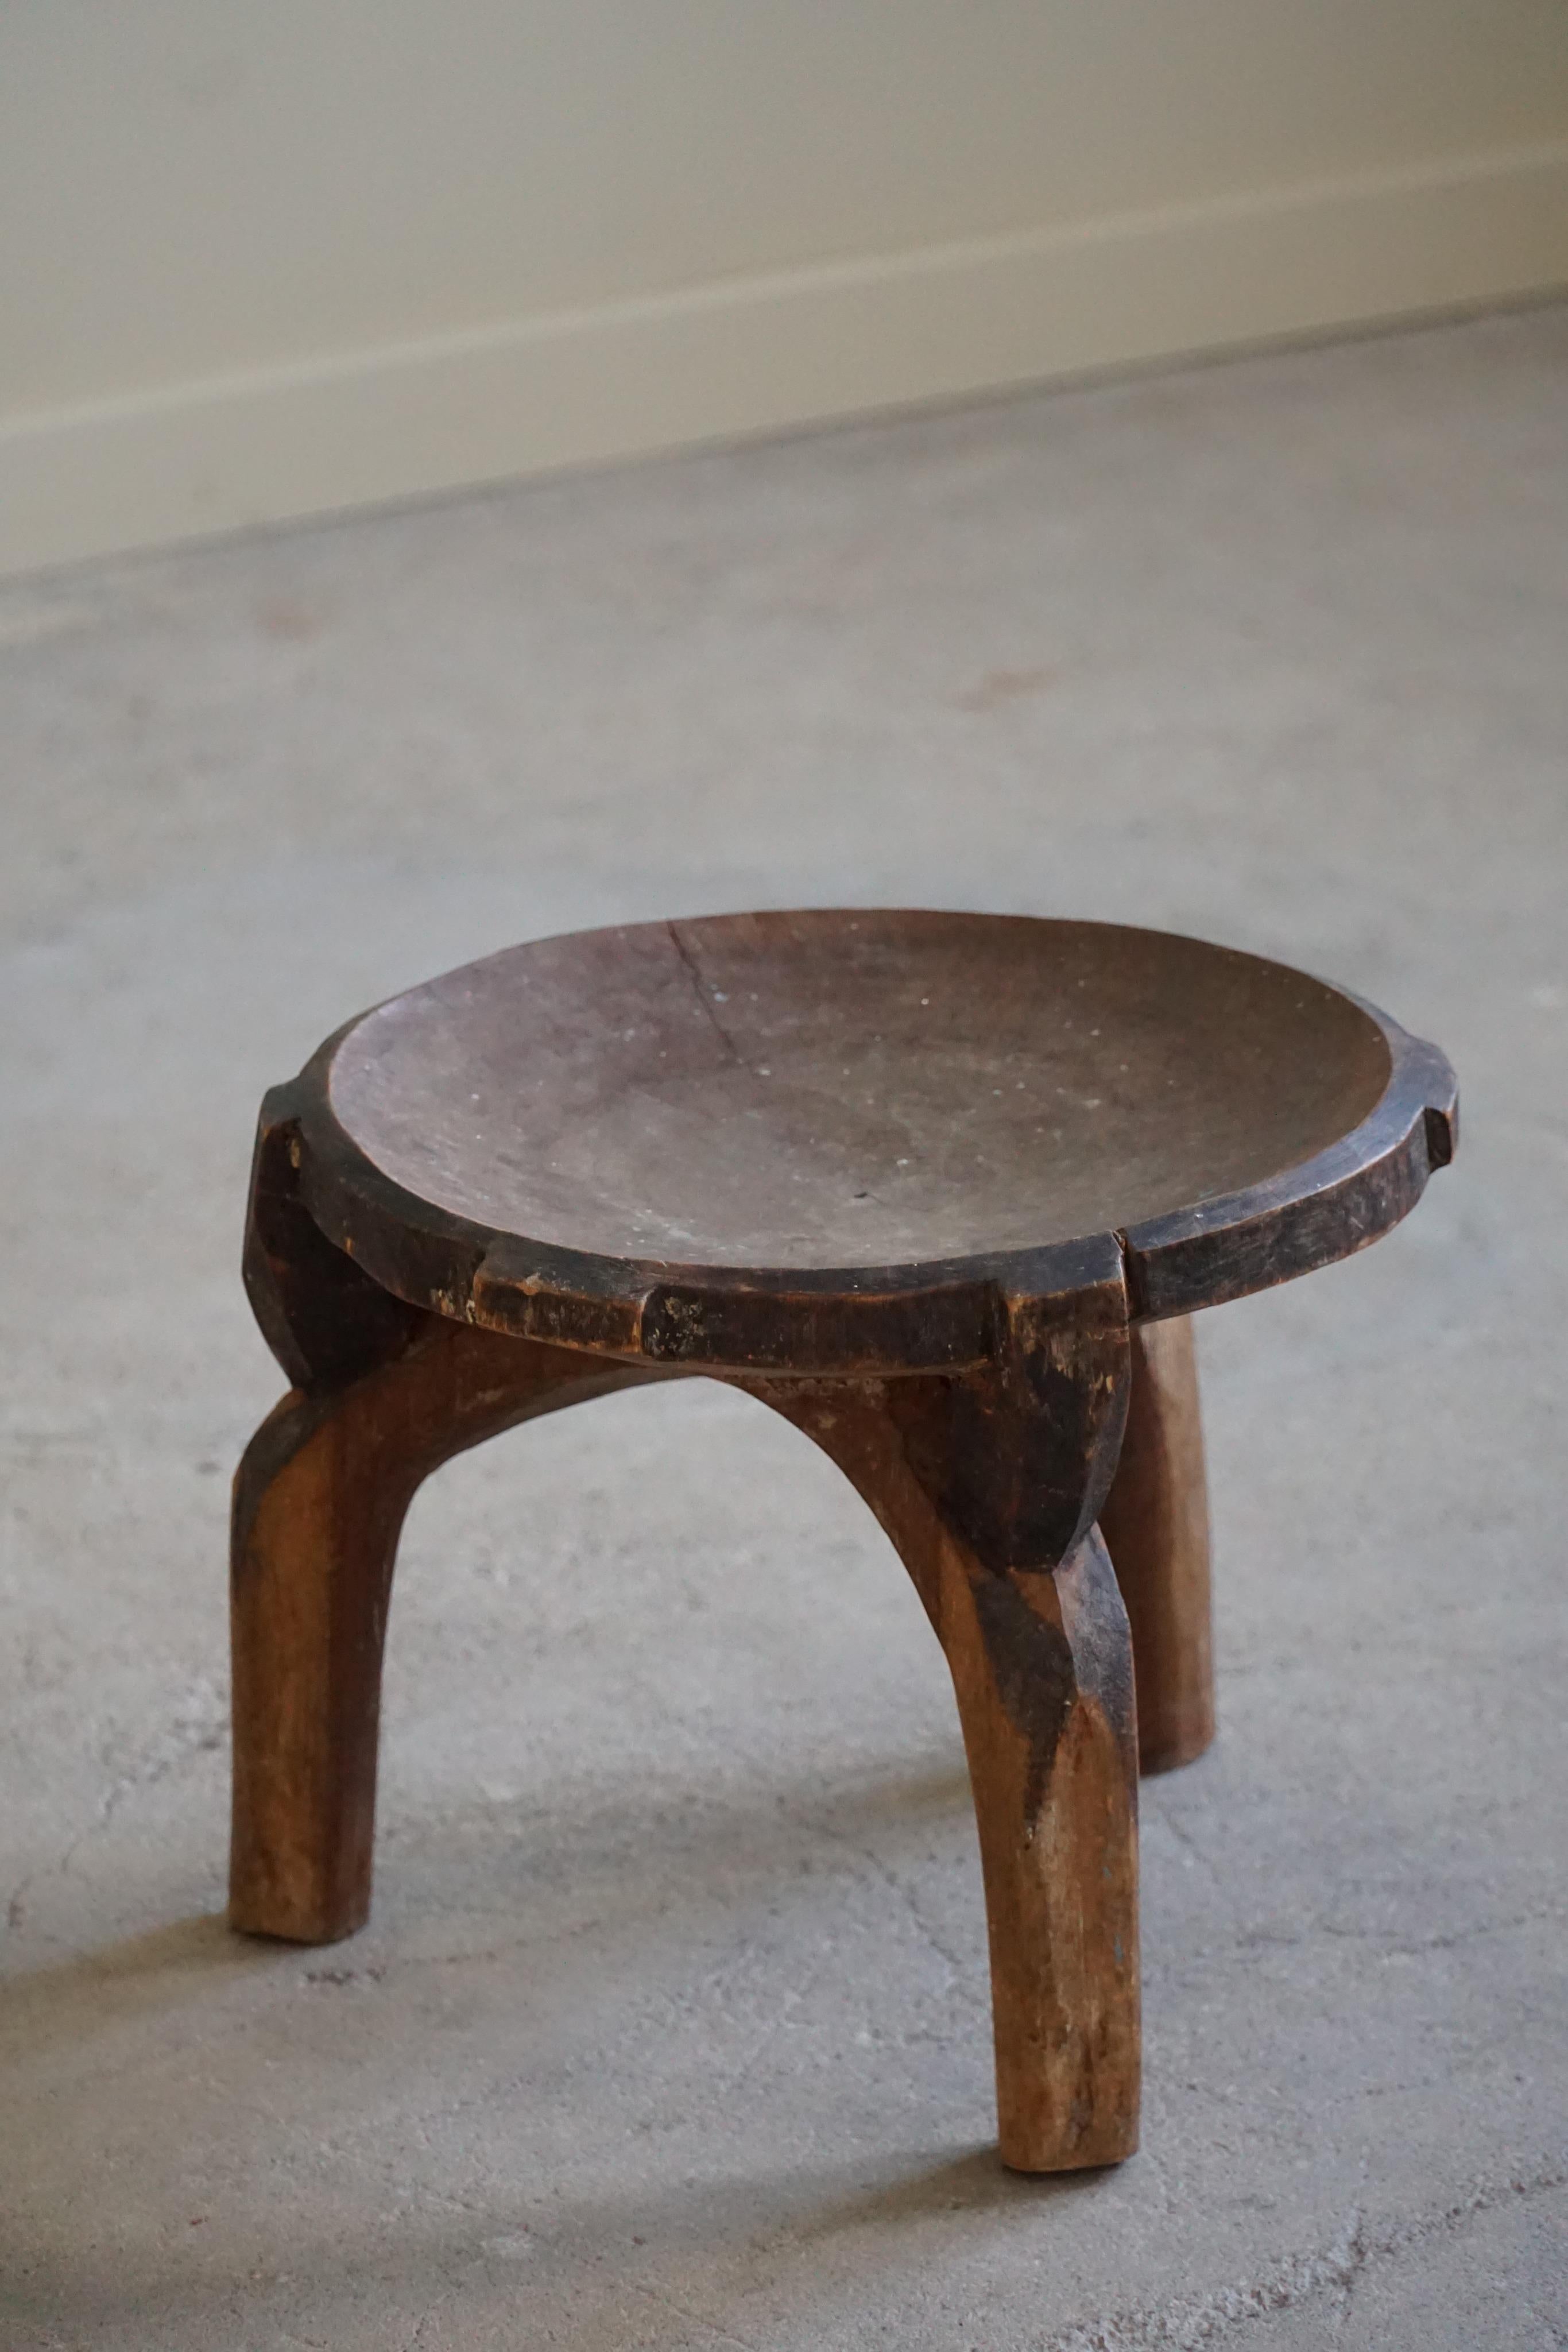 Hand-Carved Tripod Stool / Side Table in Solid Wood, Wabi Sabi Style, Made in Africa, 1950s